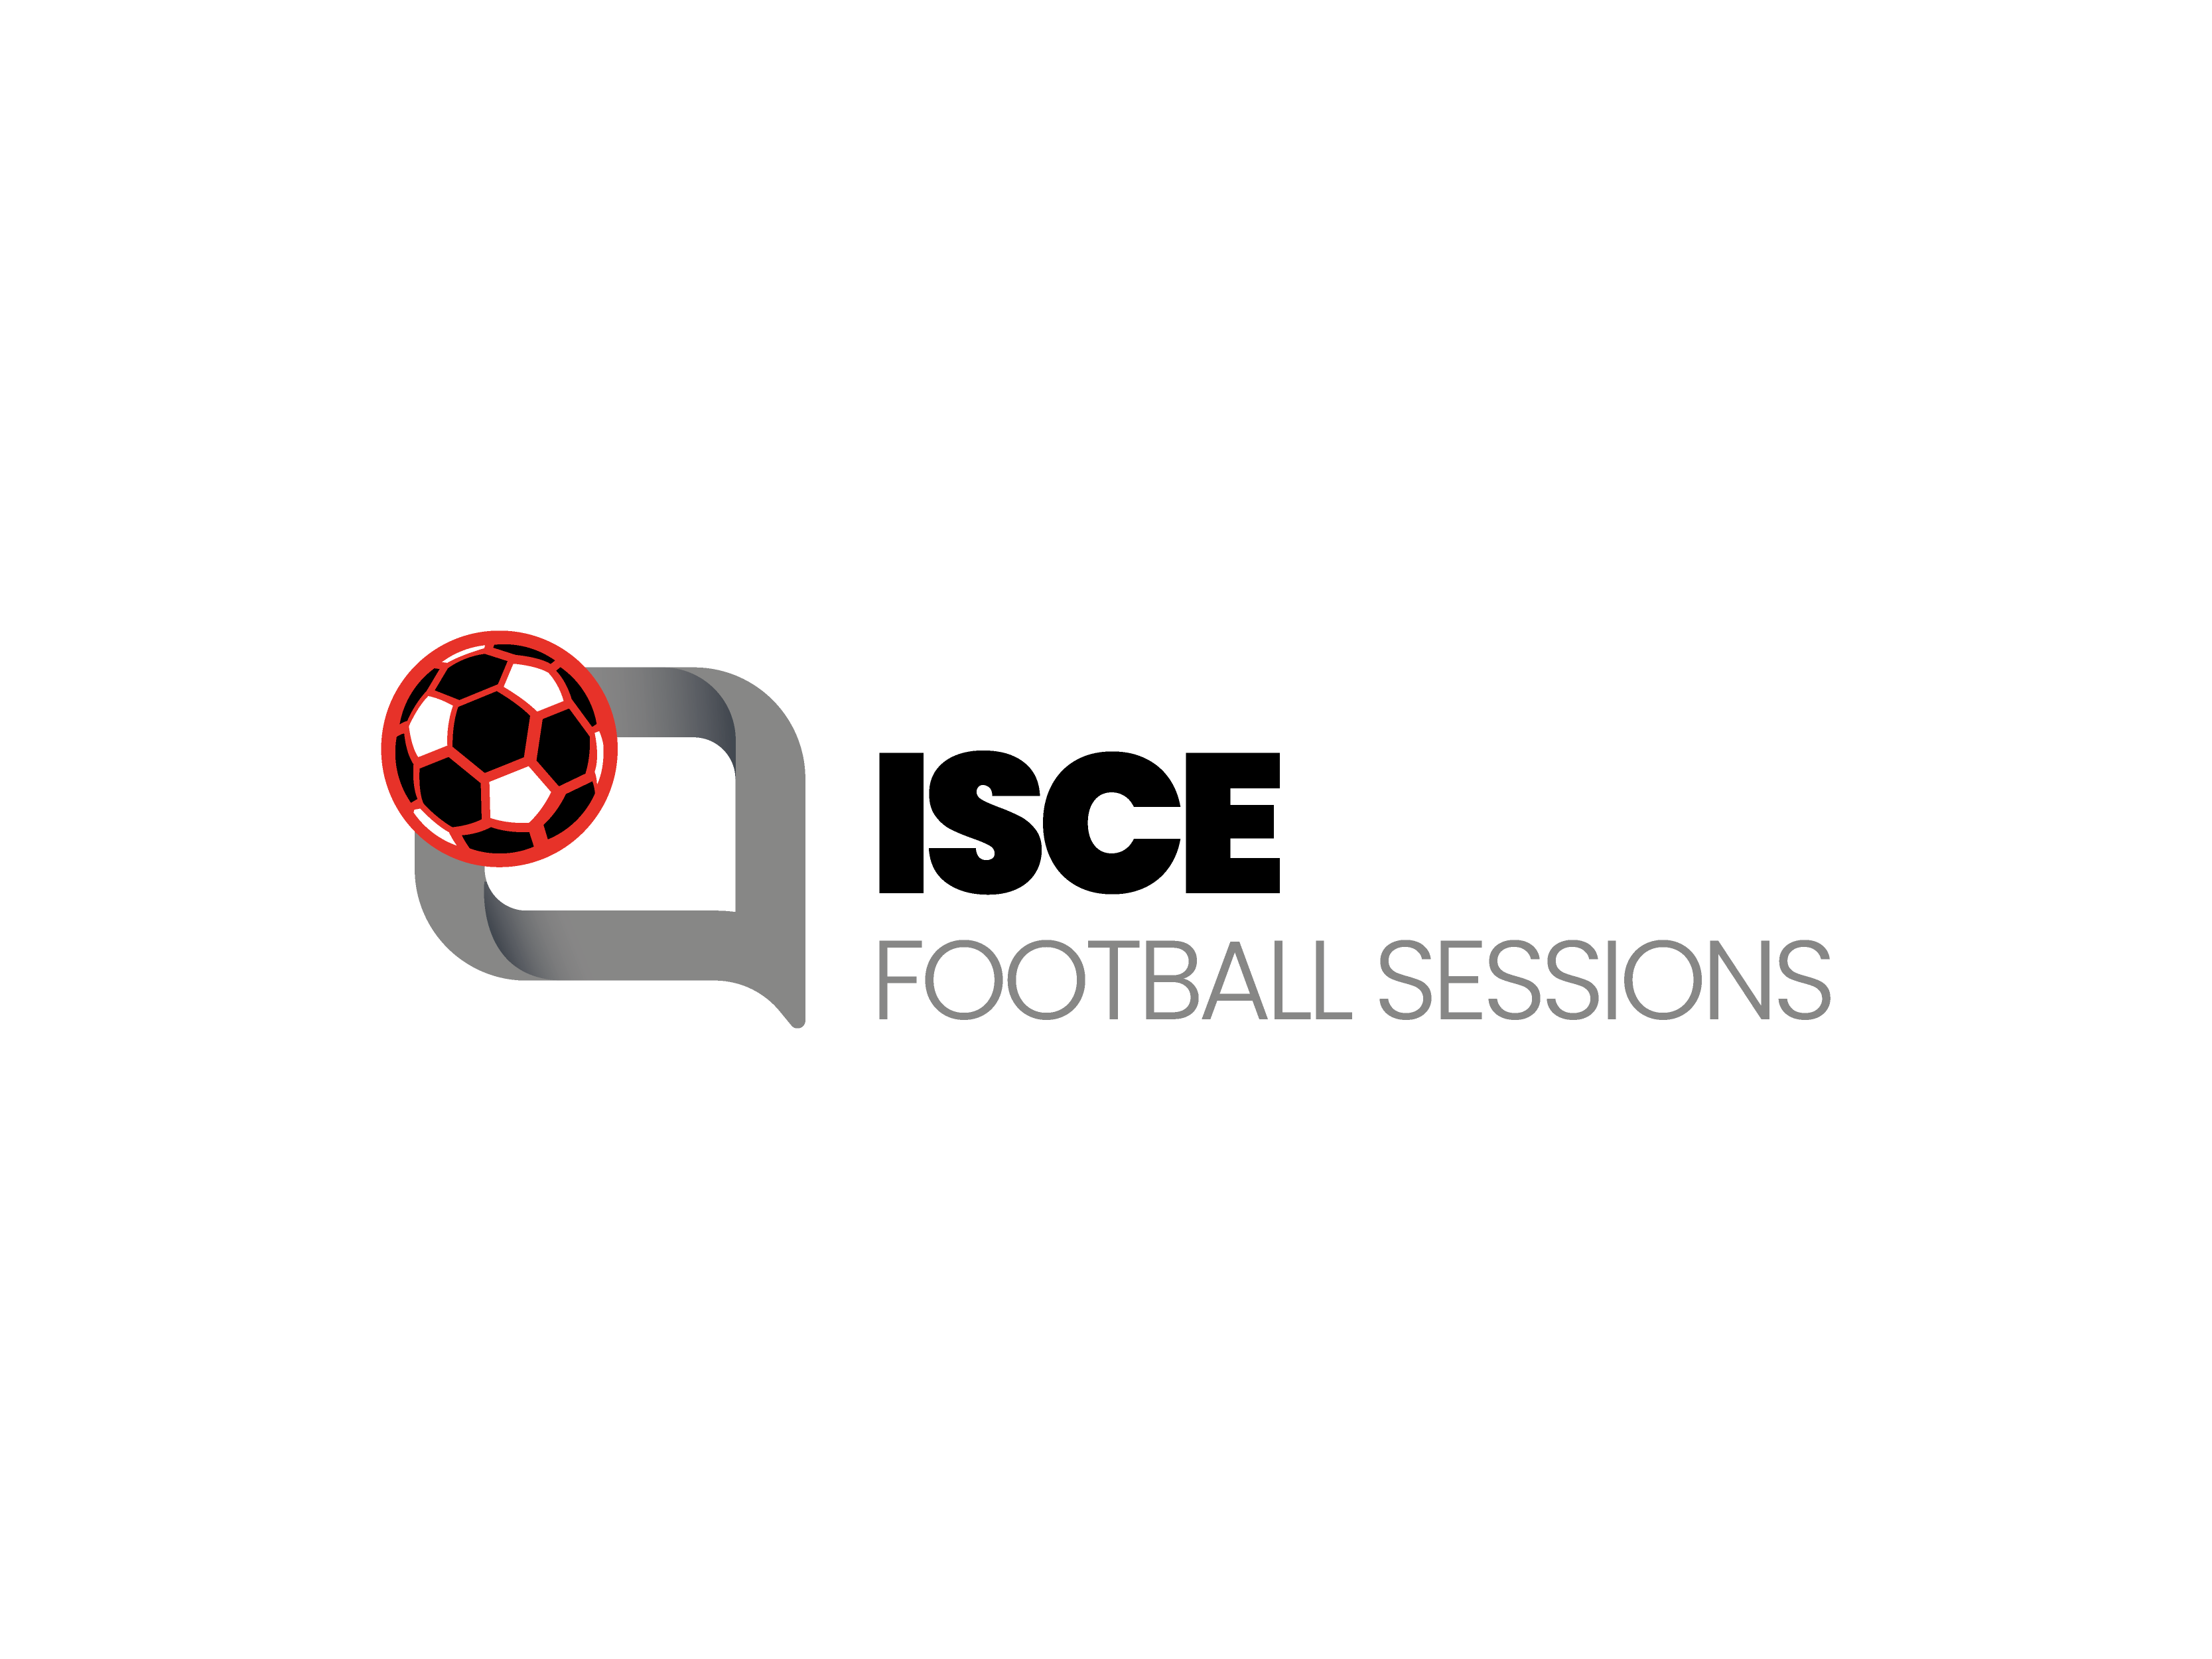 ISCE Football Sessions